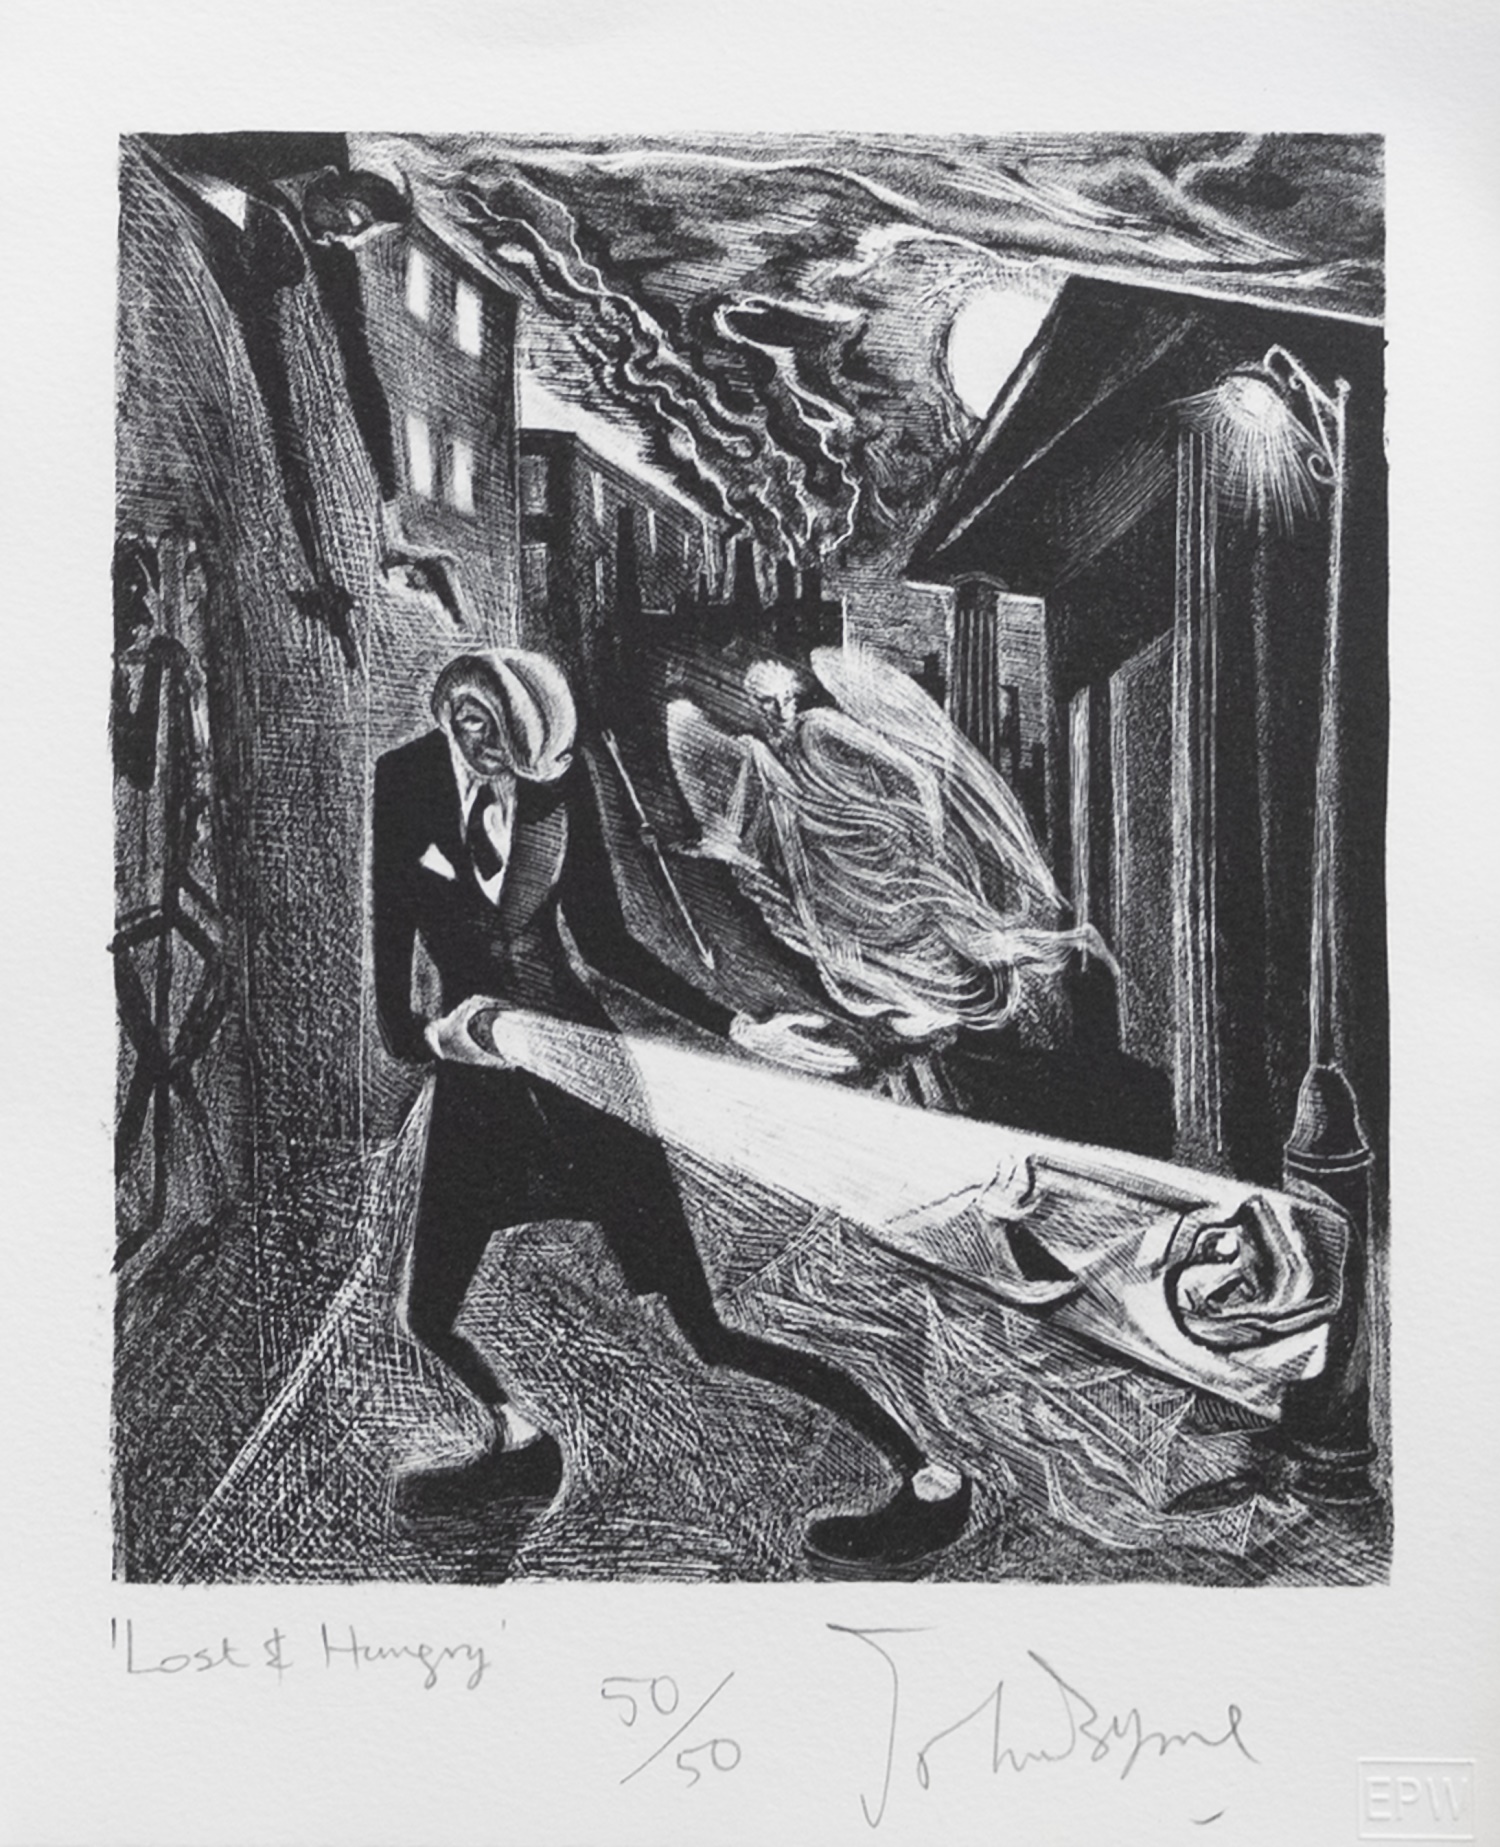 LOST AND HUNGRY, A LITHOGRAPH BY JOHN BYRNE - Image 2 of 2